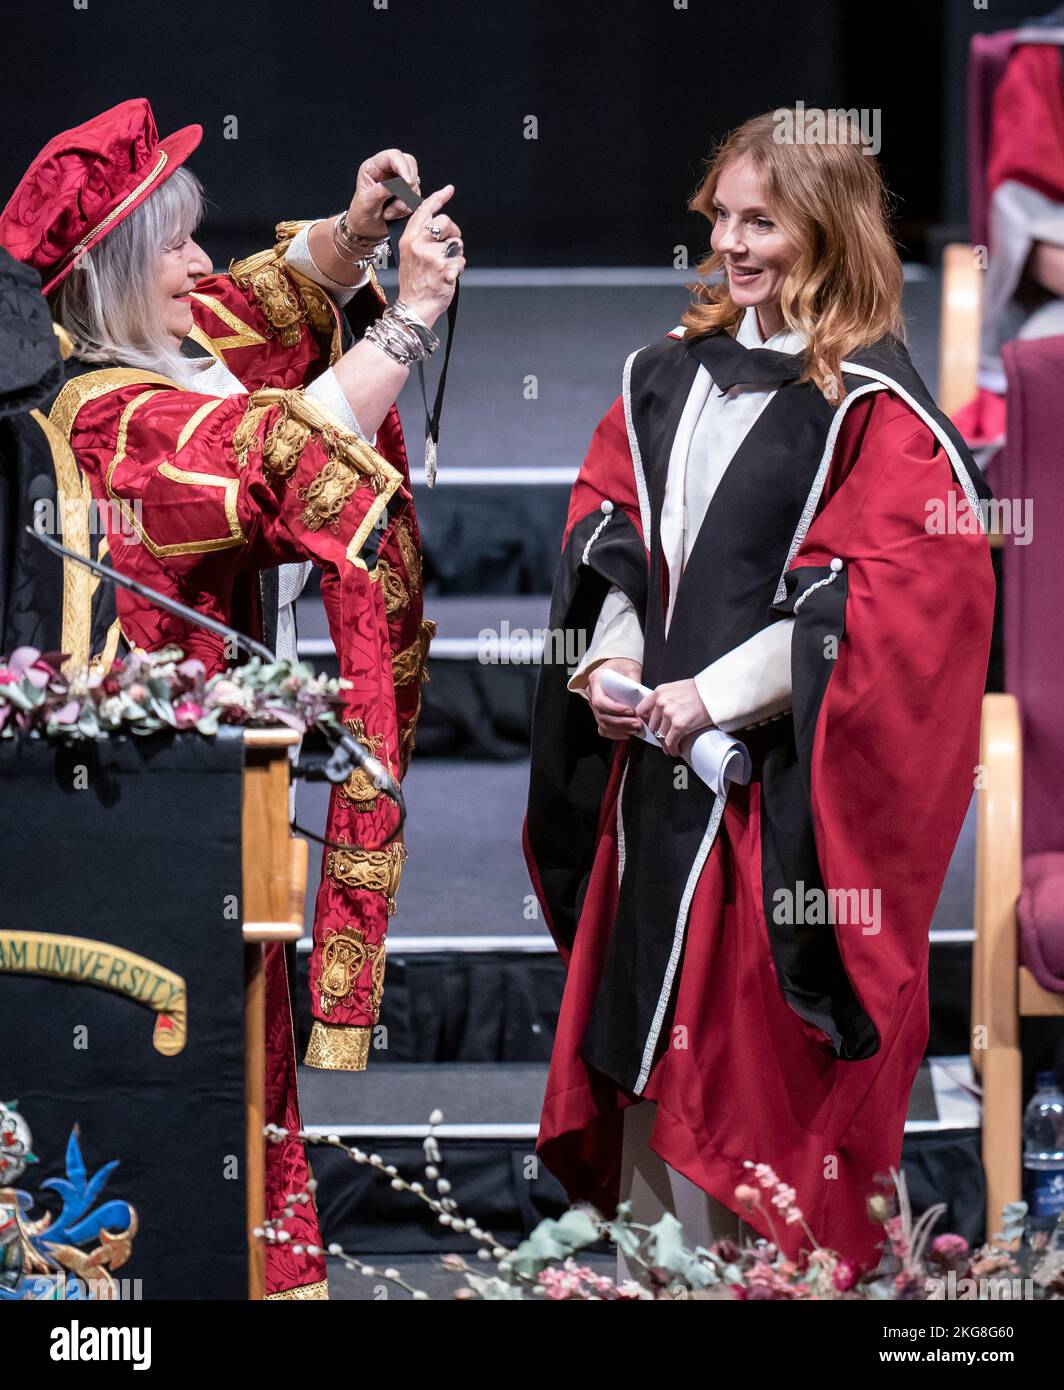 Chancellor of Sheffield Hallam University Baroness Helena Kennedy (left) presents Geri Halliwell-Horner (right) with an honorary doctorate from Sheffield Hallam University at Ponds Forge International Sports Centre in Sheffield. Picture date: Tuesday November 22, 2022. Stock Photo